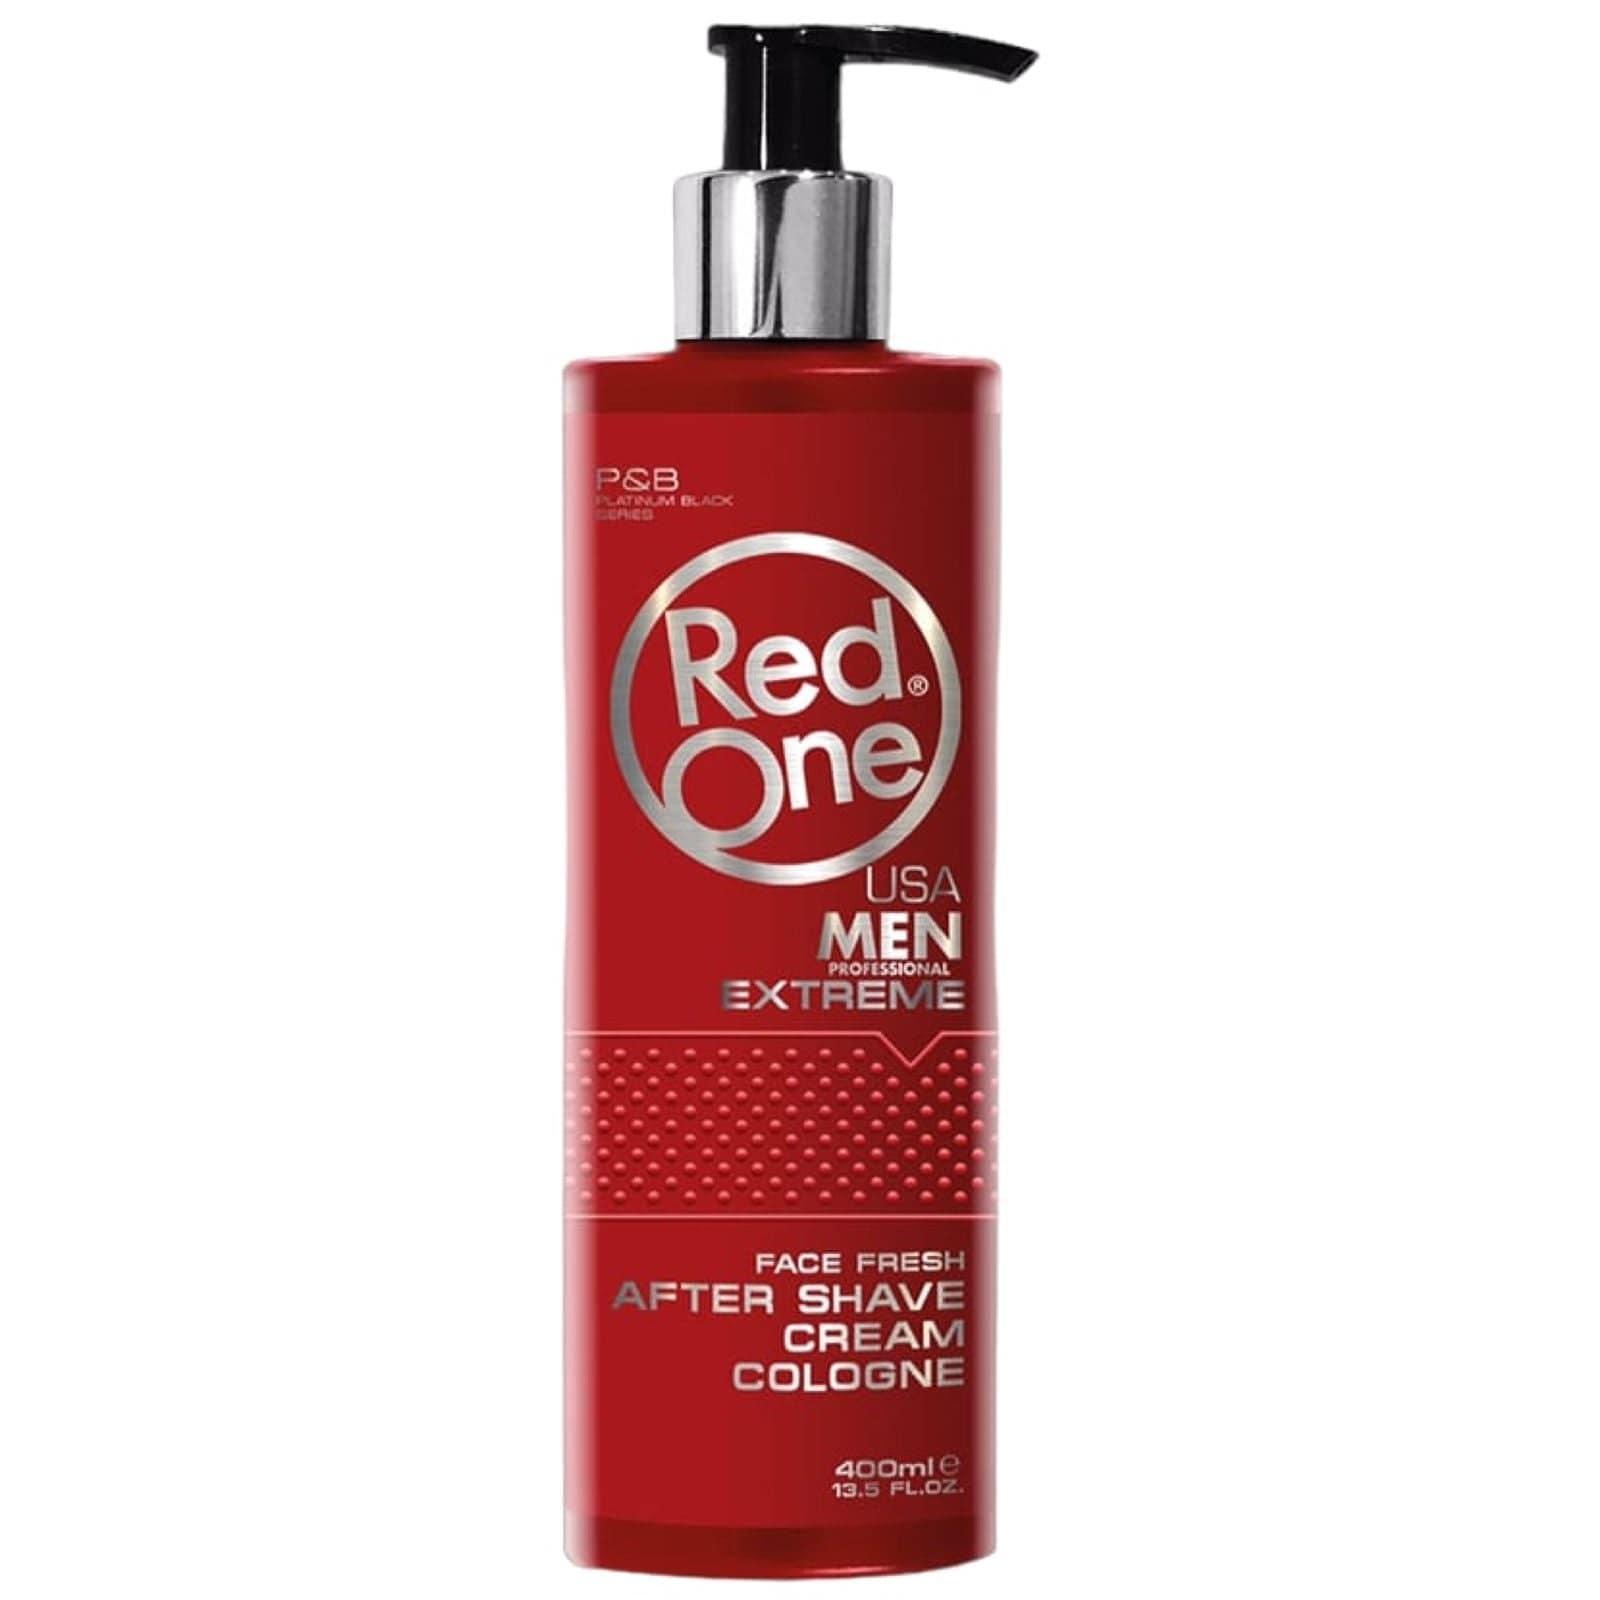 RedOne After Shave Cream Cologne Extreme 400ml